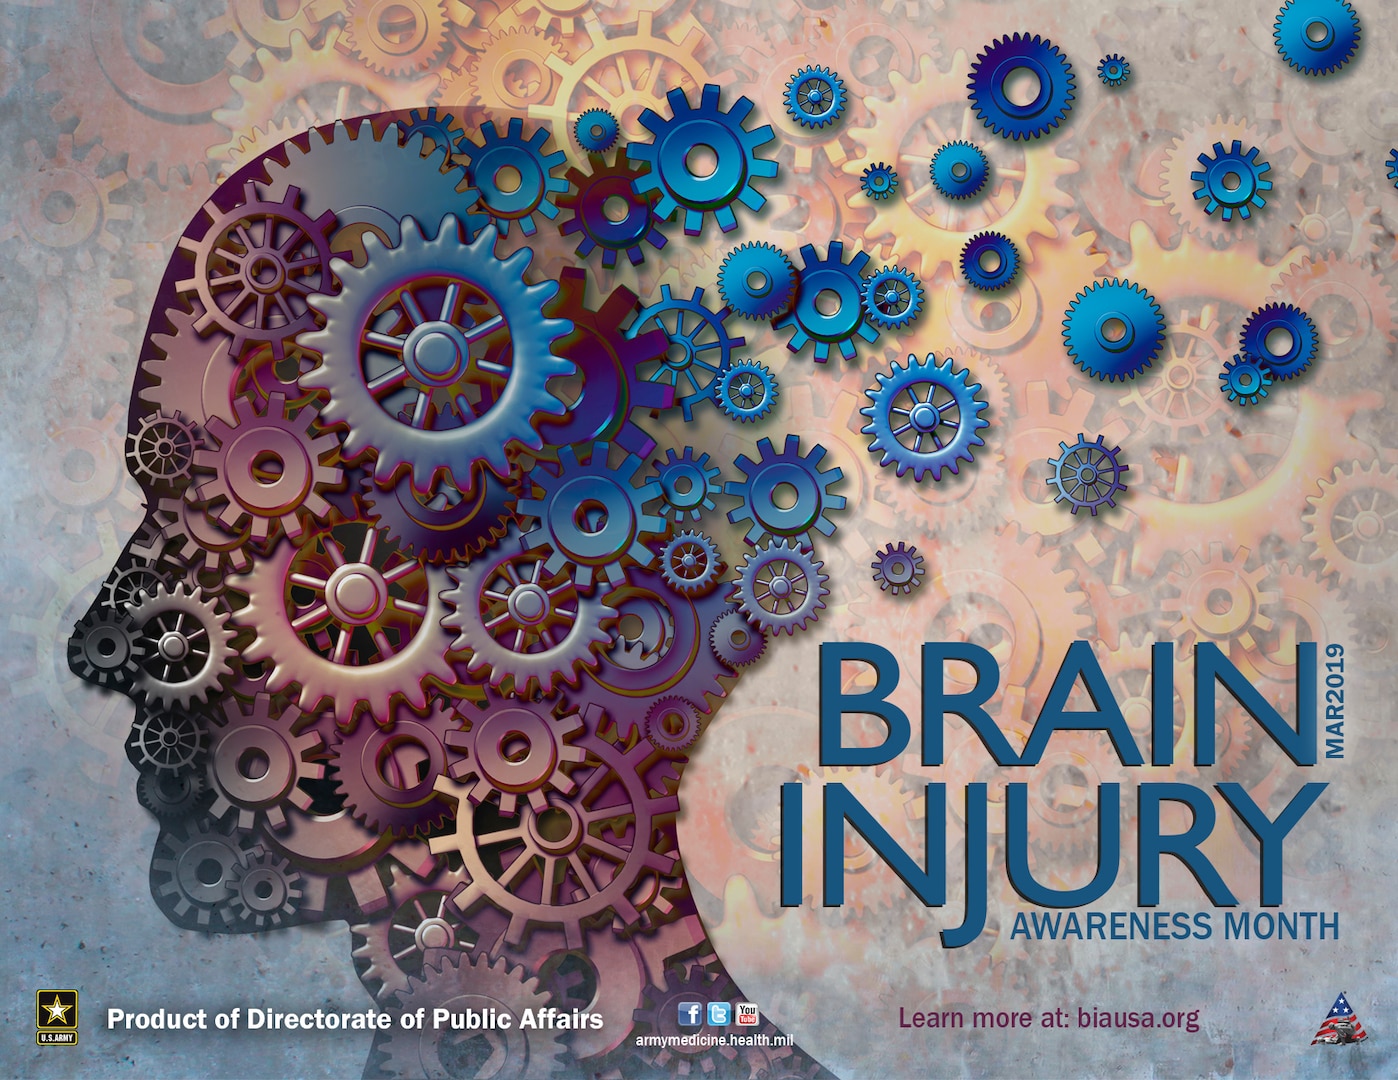 The month of March is dedicated to brain injury awareness and prevention.